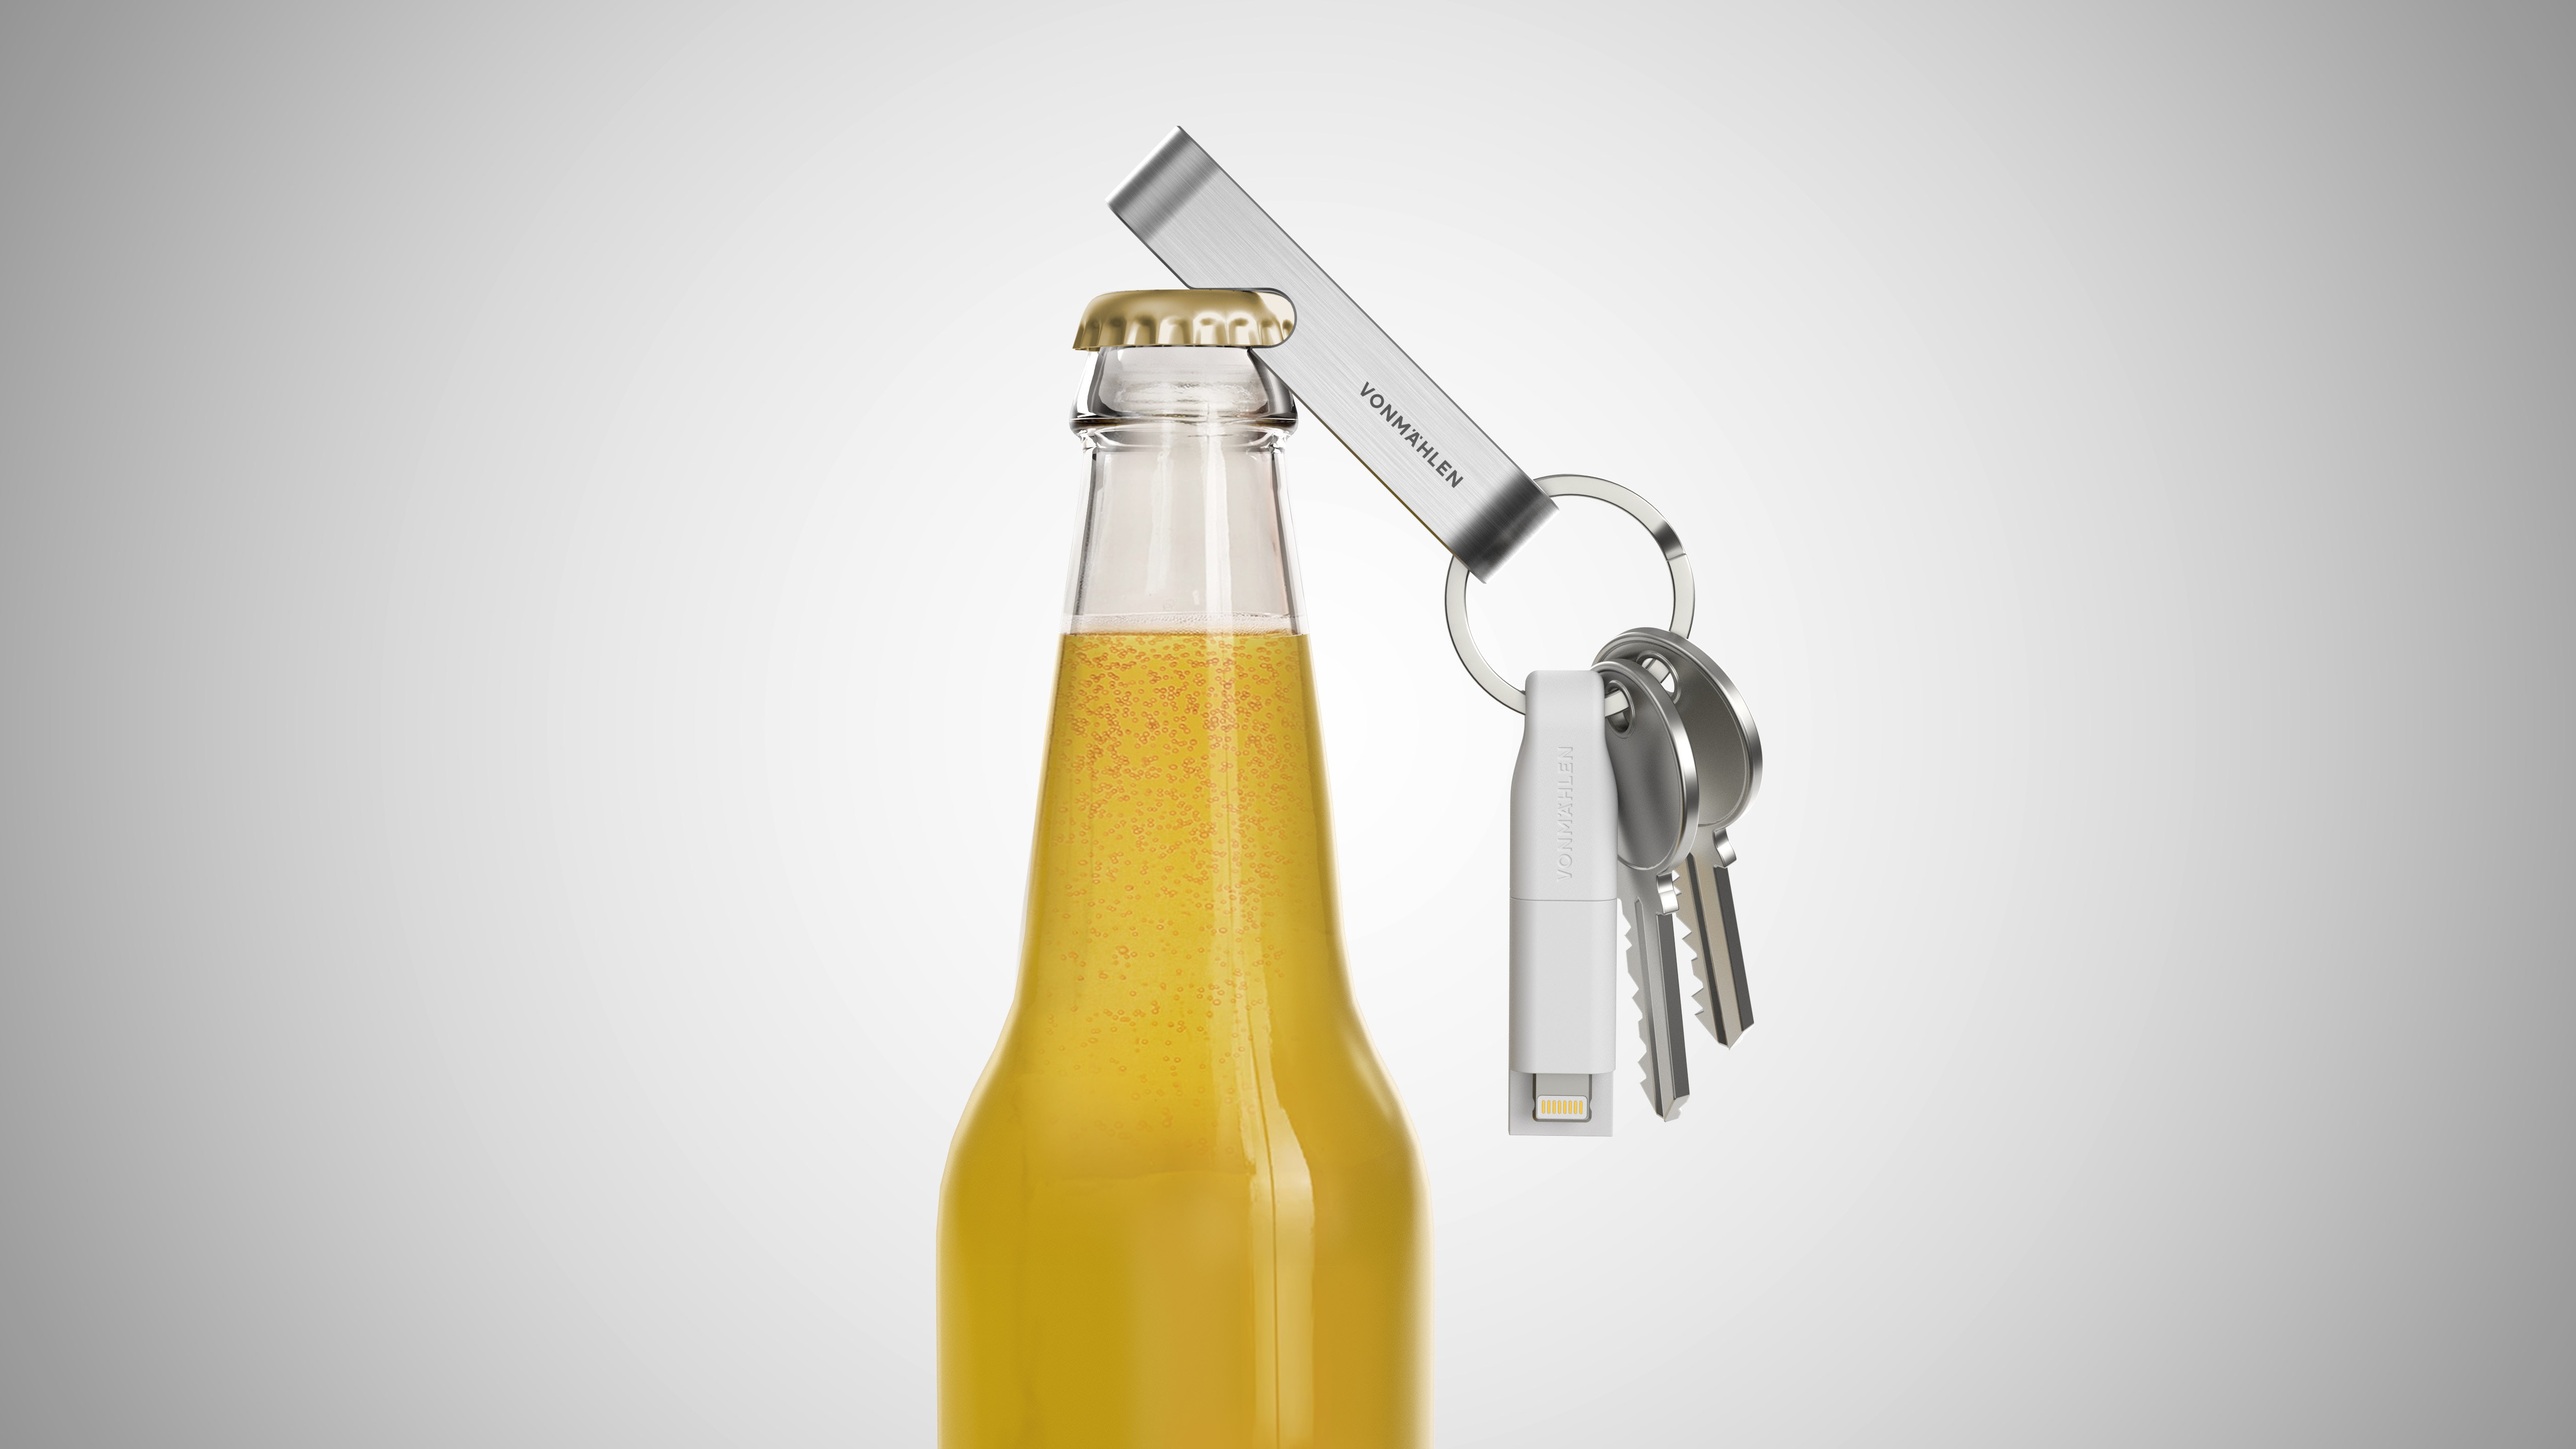 And let's not forget that crucial piece of technology, the bottle opener. For whatever you're drinking.